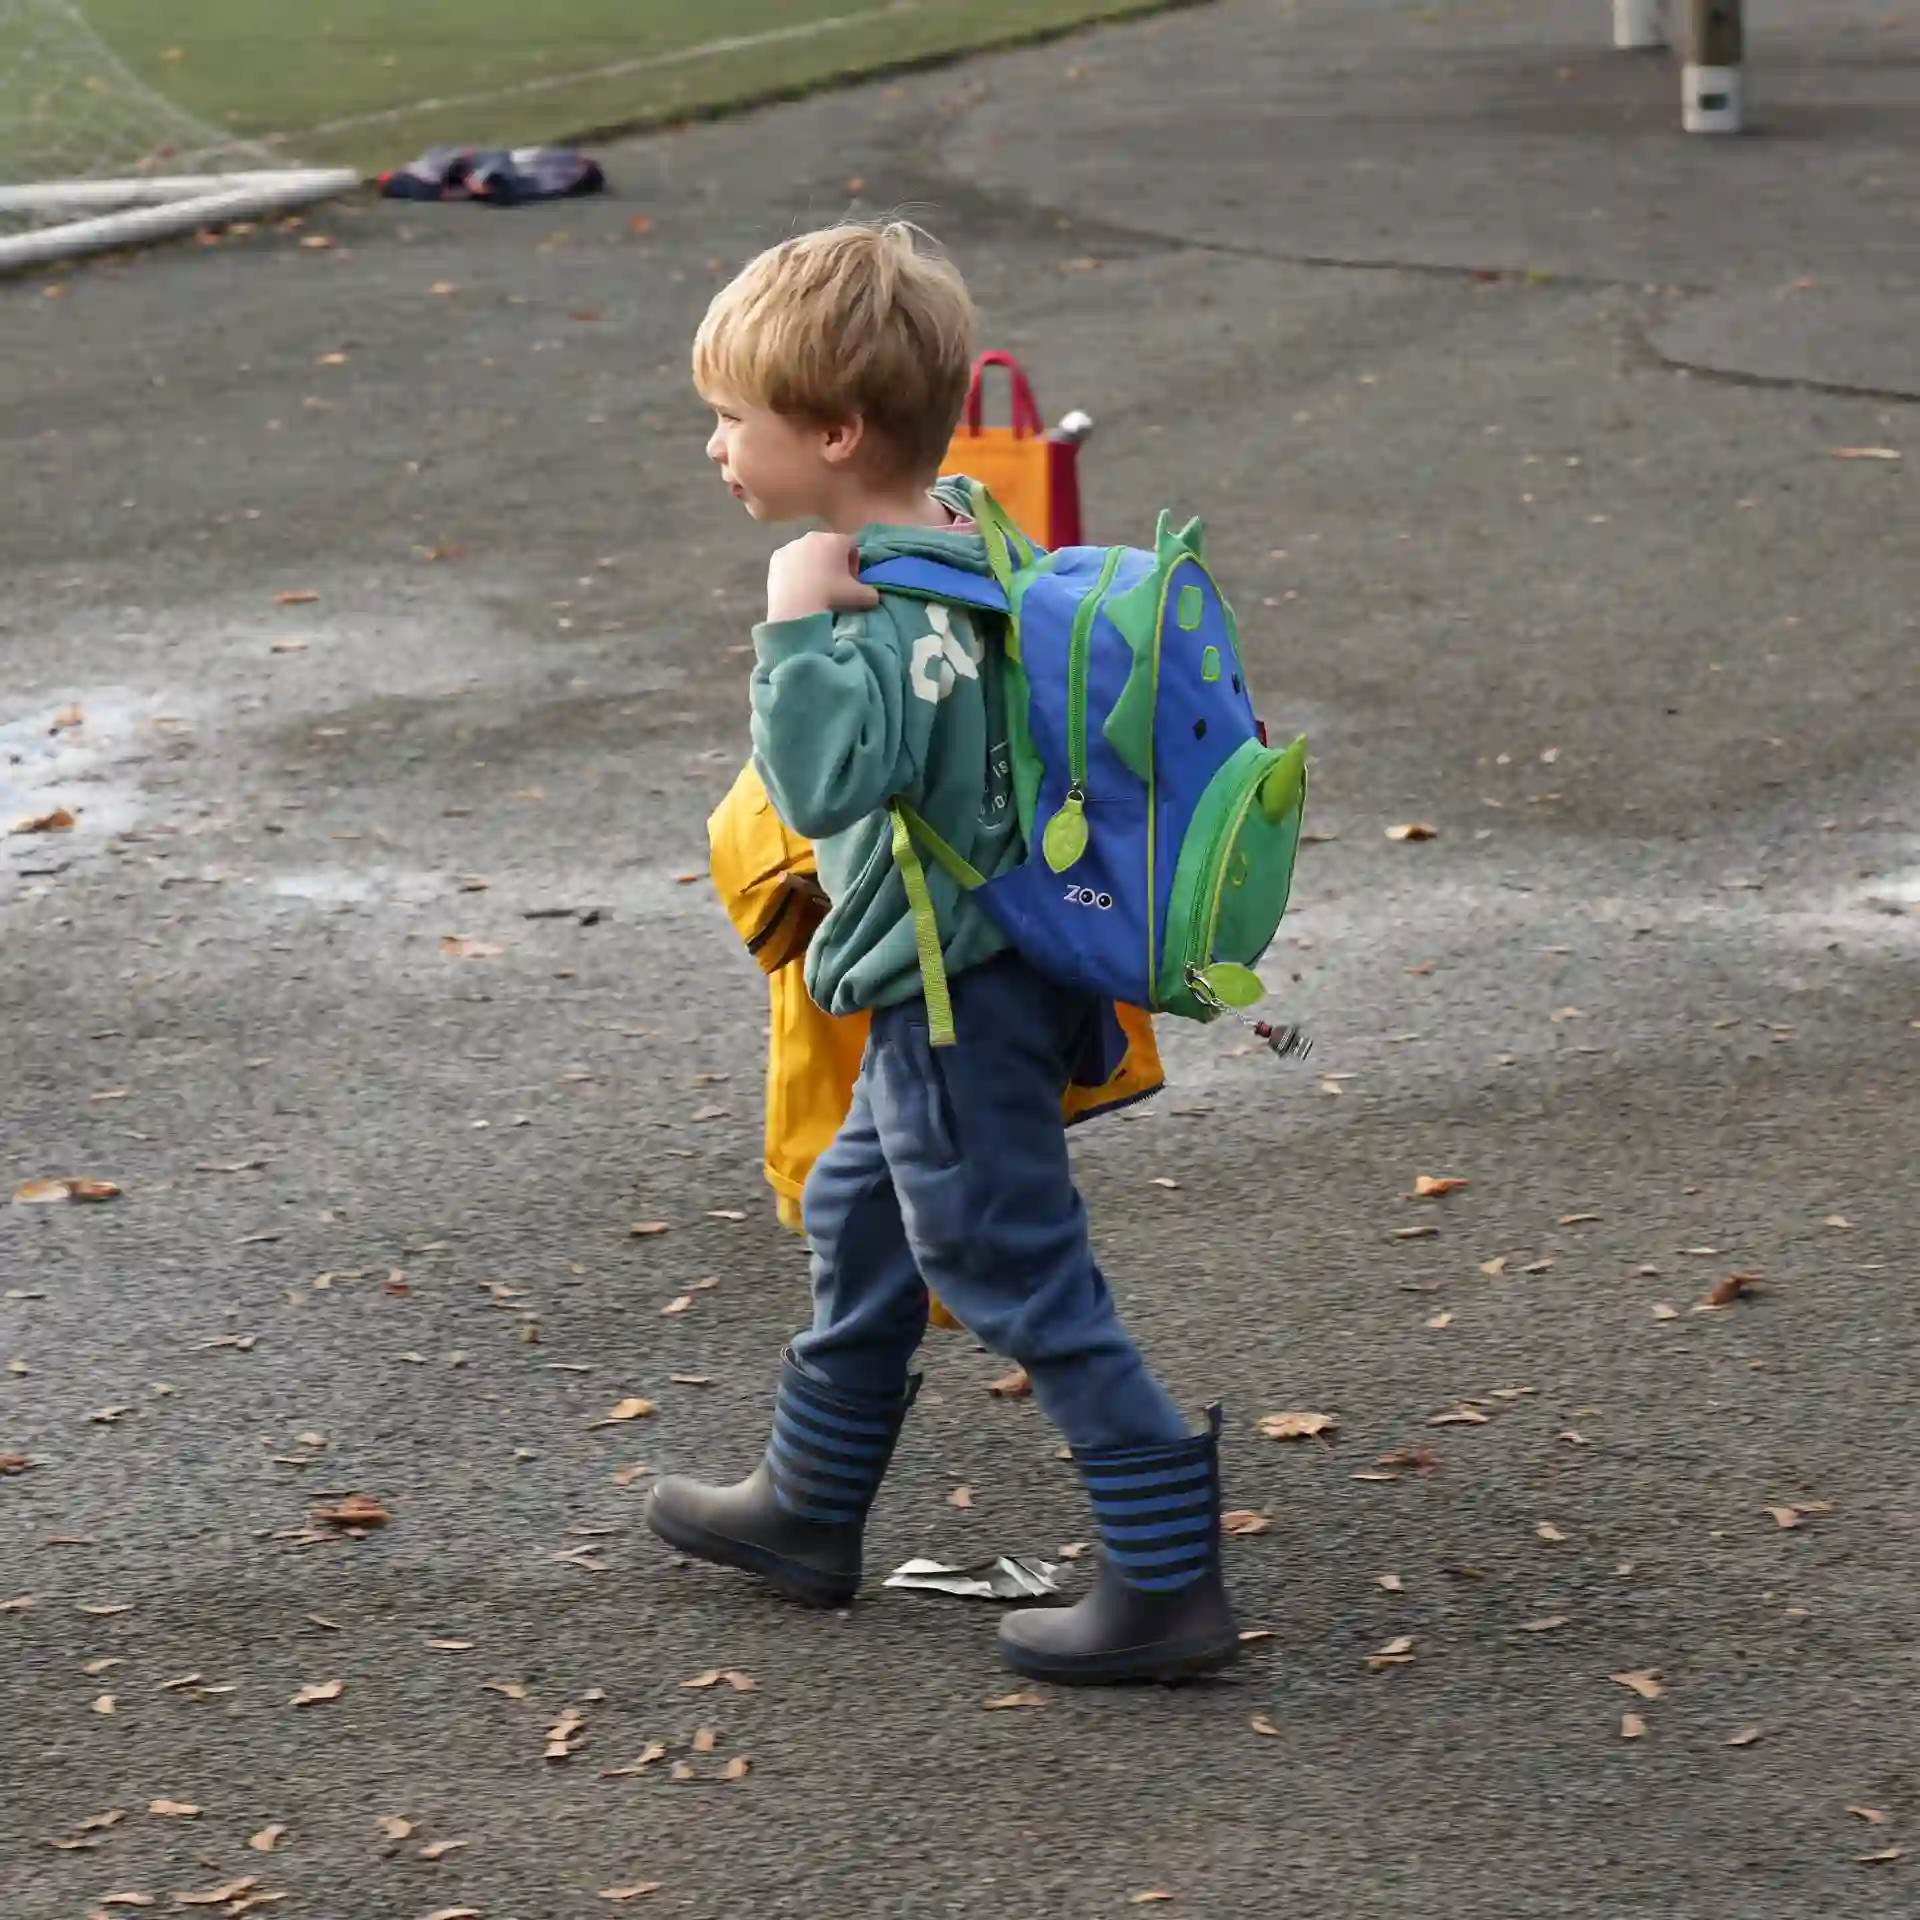 A little boy walking with a dinosaur backpack on.